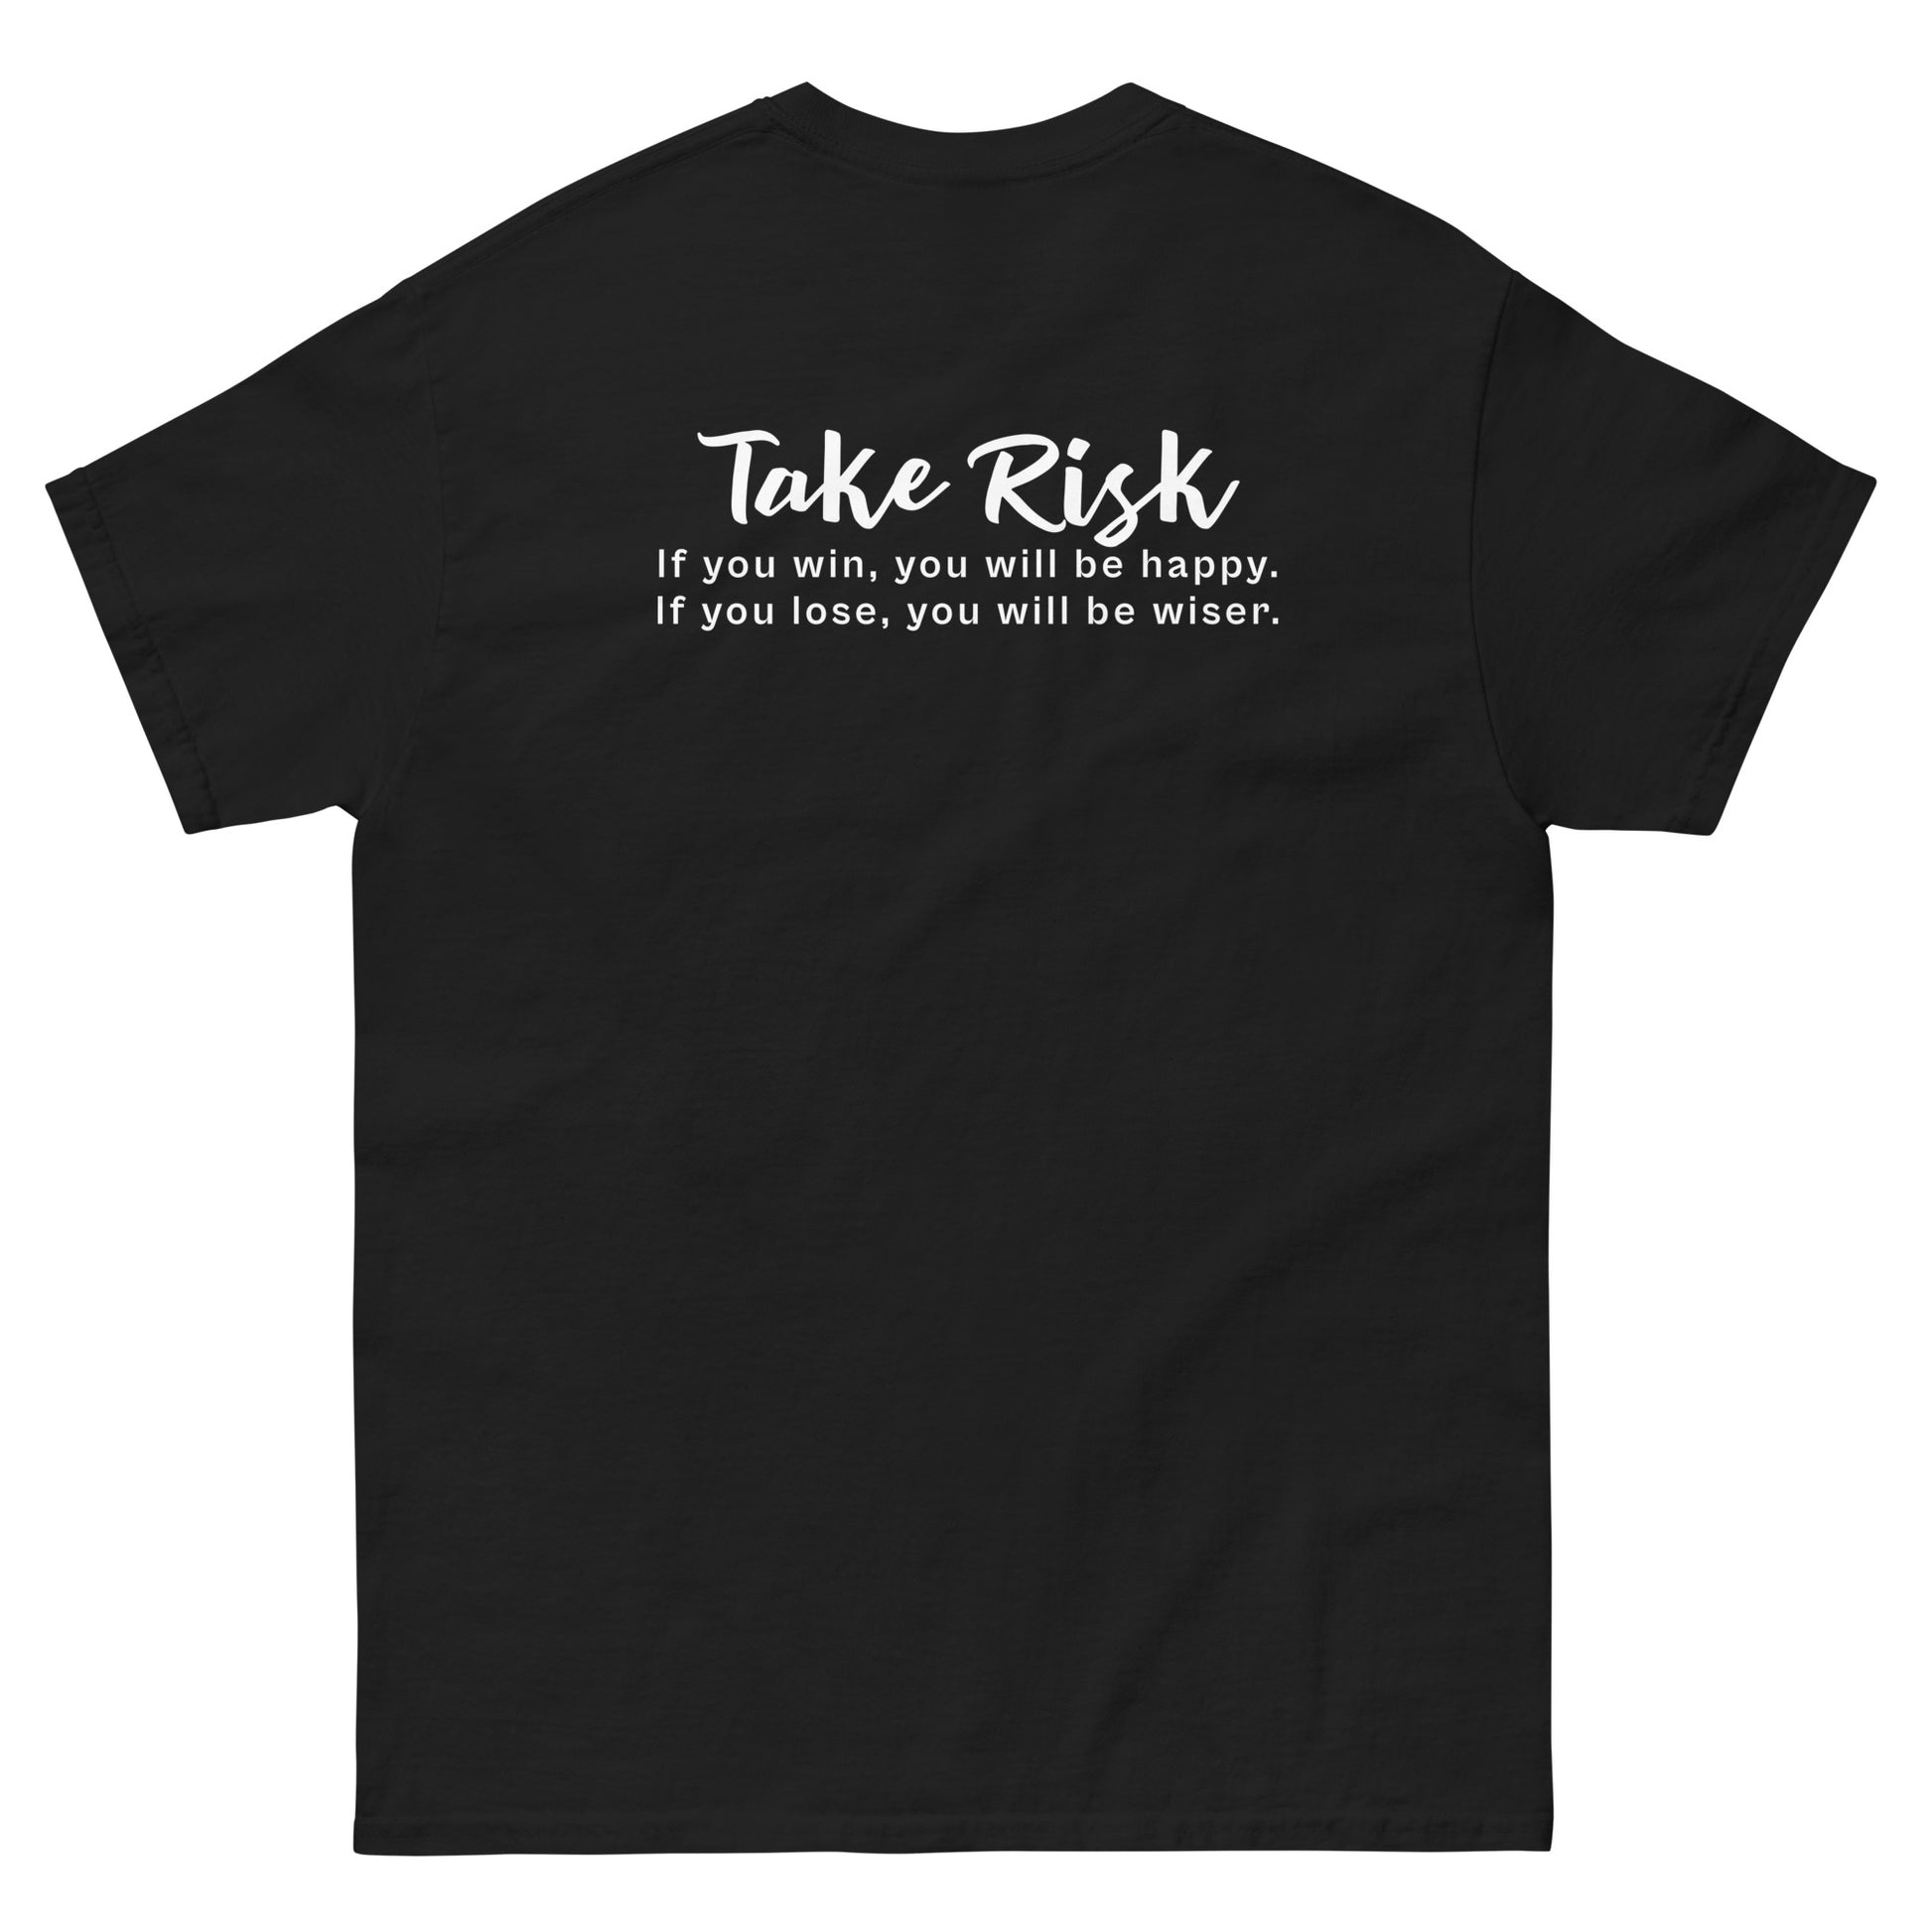 Black High Quality Tee - Front Design with "Take Risk, if you win you will be happy, if you lose you will be wiser." print and an UFO print on left chest - Back Design with a Phrase "Take Risk, if you win you will be happy, if you lose you will be wiser." print